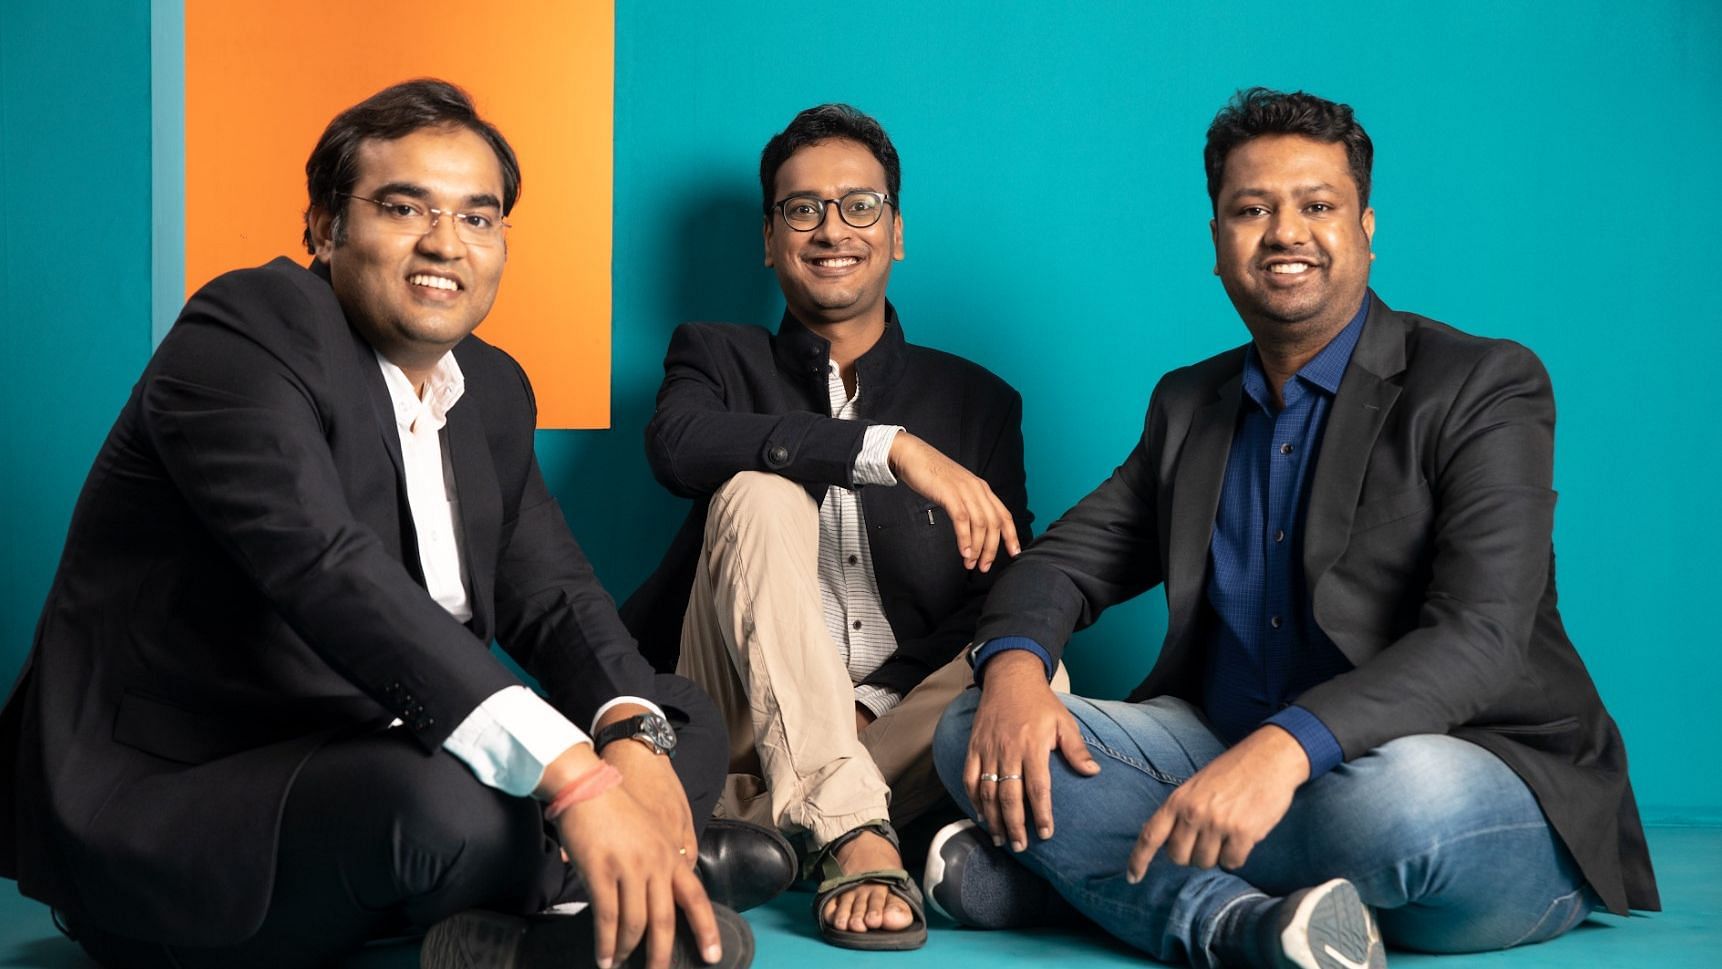 <div class="paragraphs"><p>L to R: Vimal Sagar - Co-founder &amp; COO, Govind Soni - Co-founder &amp; CTO and Ashish Singhal - Co-founder &amp; CEO</p></div>